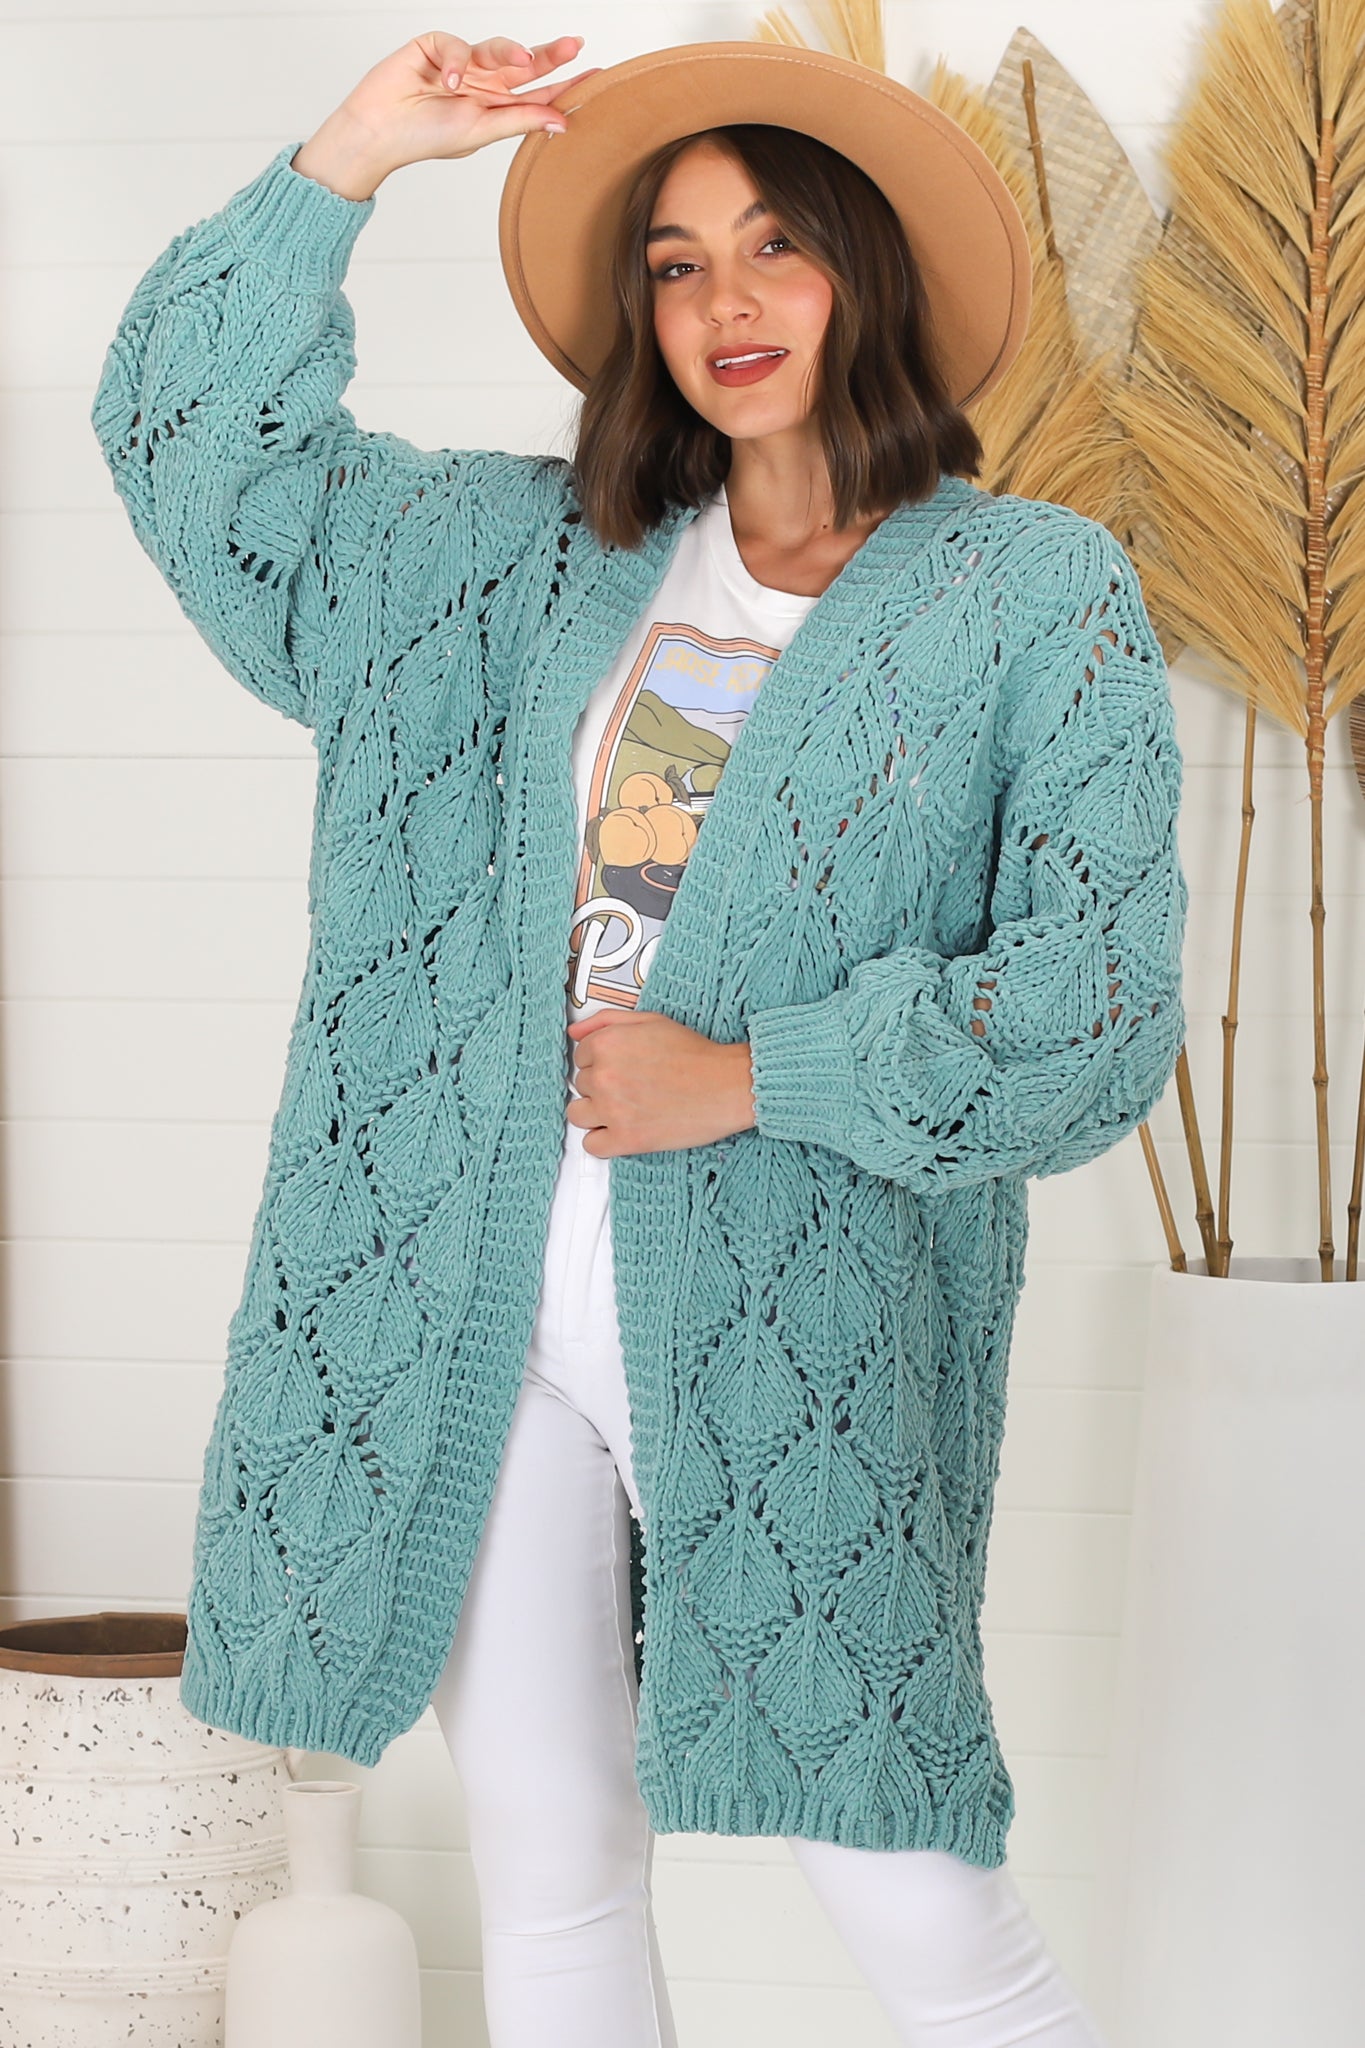 Townsend Cardigan - Open Knit Cardigan with Long Sleeves in Seafoam Green